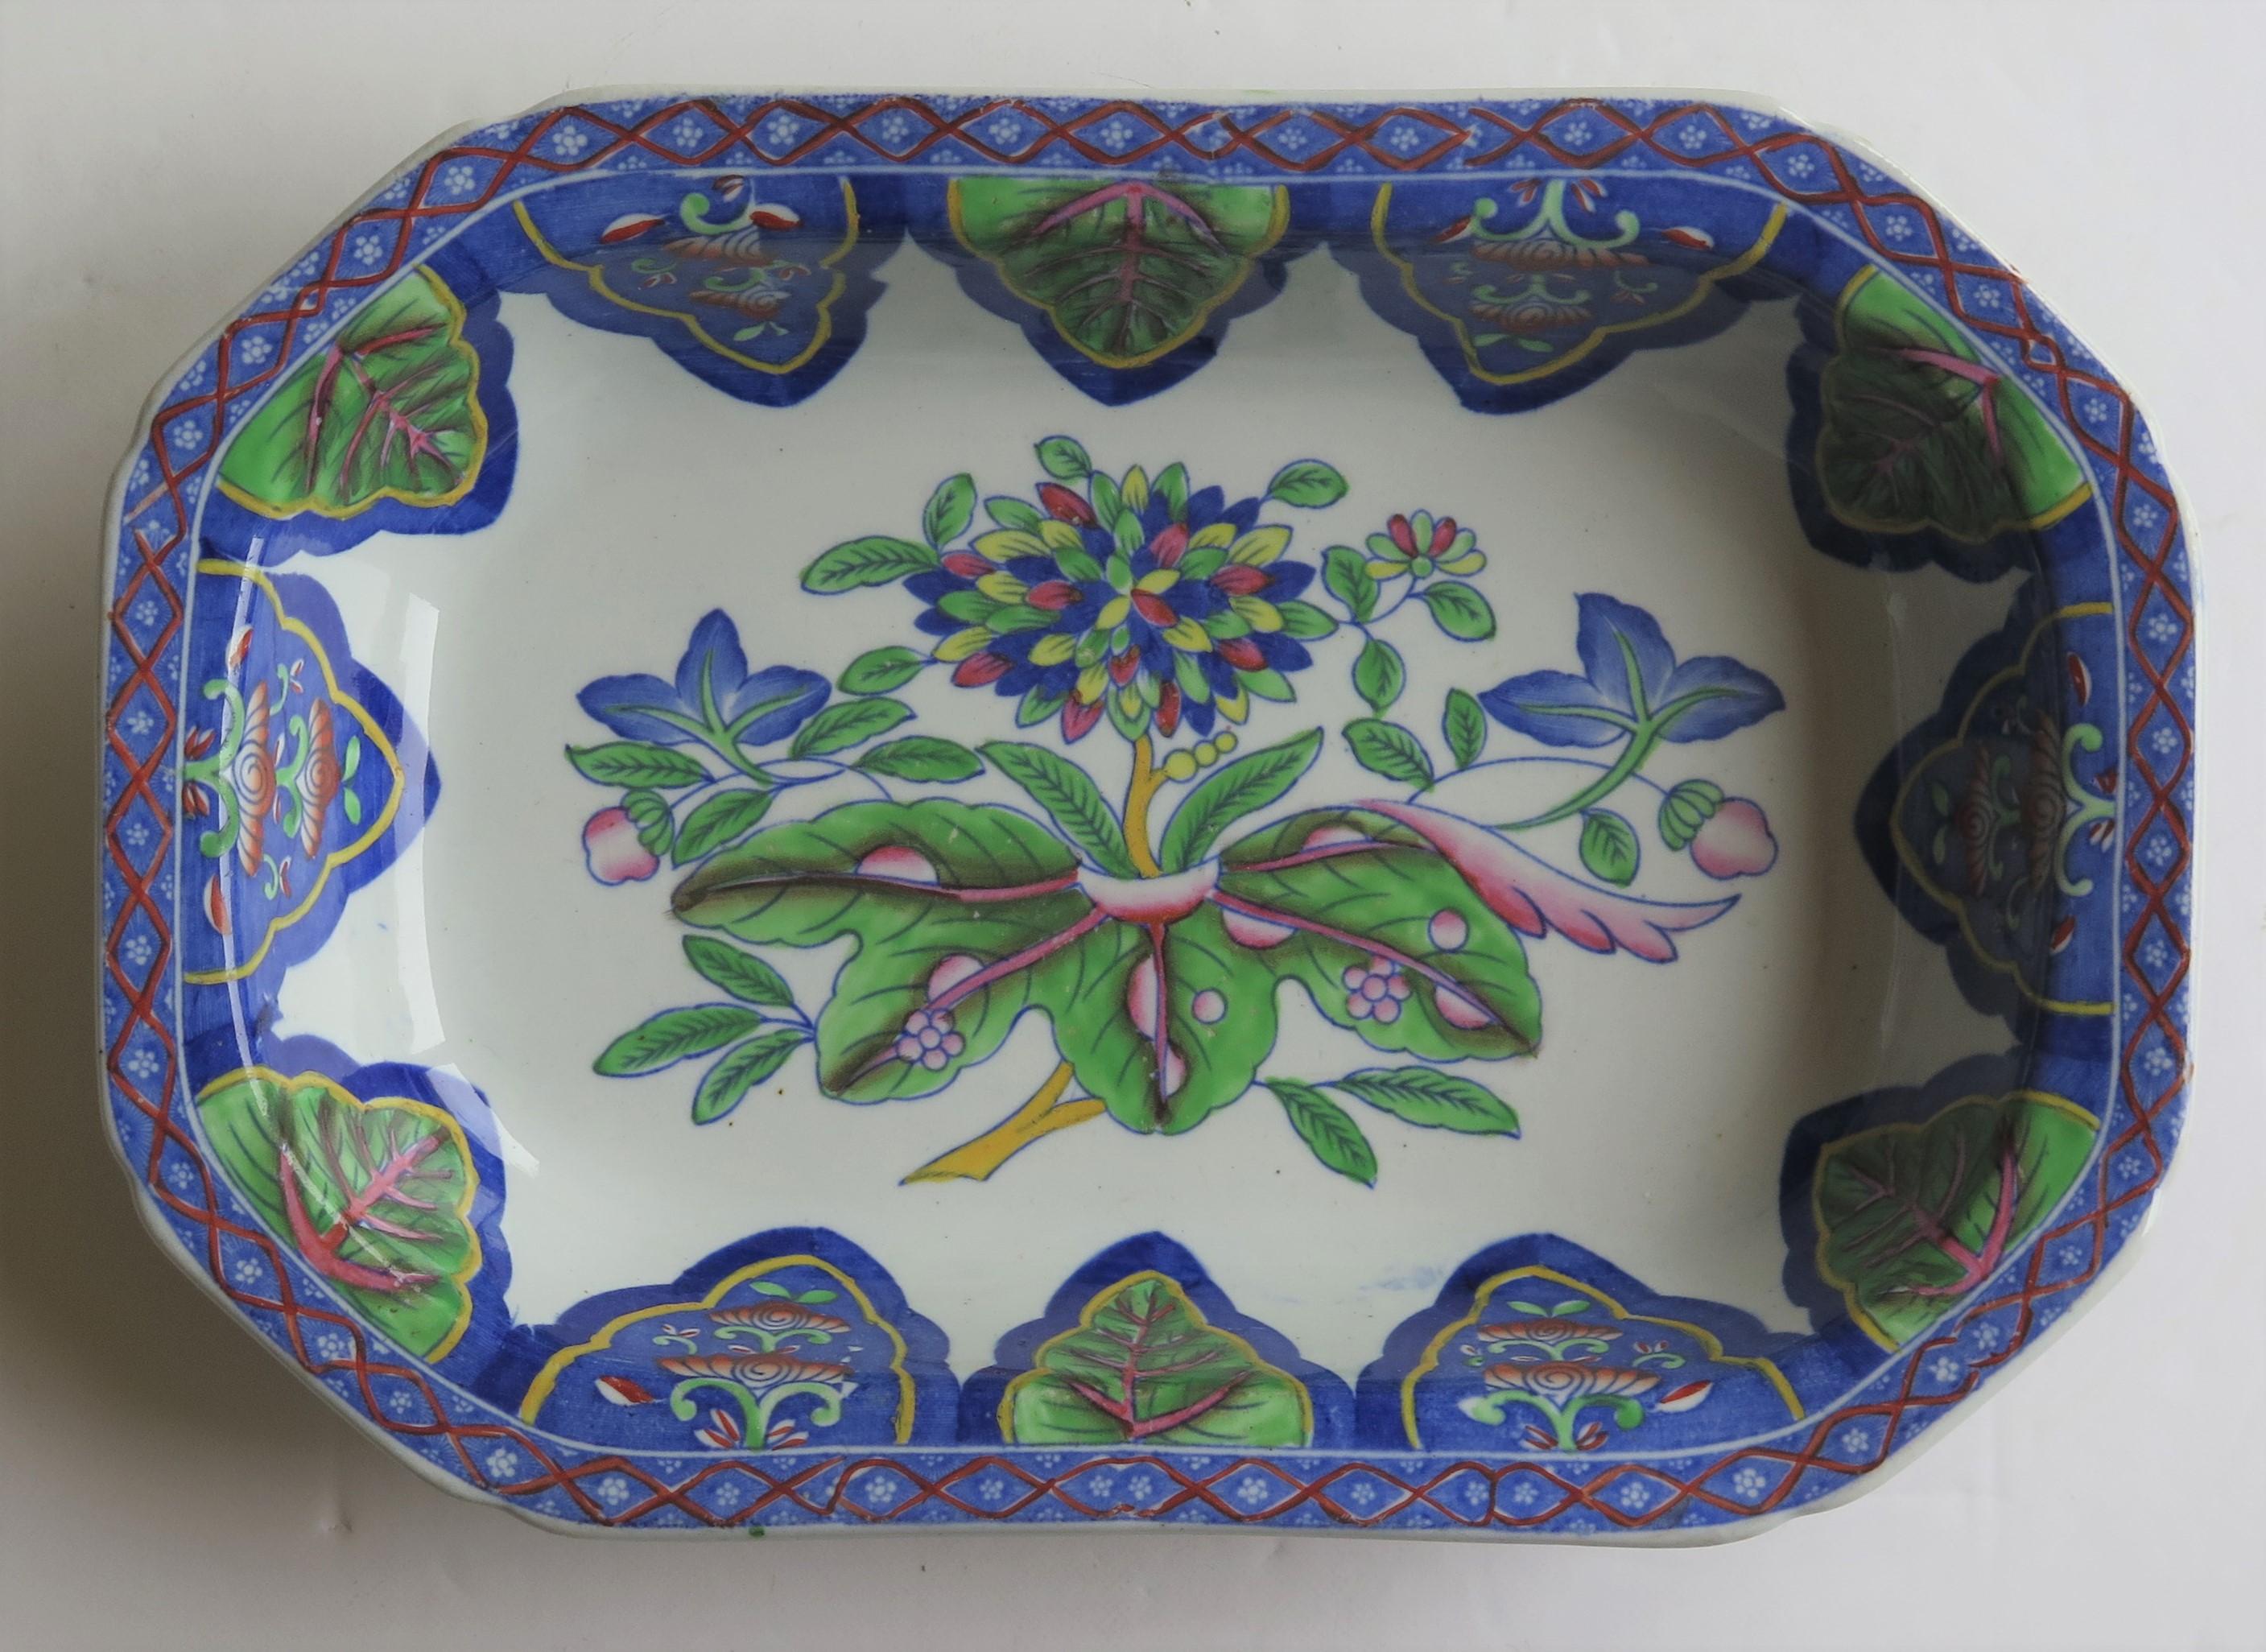 This is a beautiful Ironstone pottery deep serving dish made by Copeland & Garrett / Spode, hand enamelled in the radiating leaves pattern no 3876, produced in the first half of the 19th century, William 1Vth period, Circa 1835

The dish is well